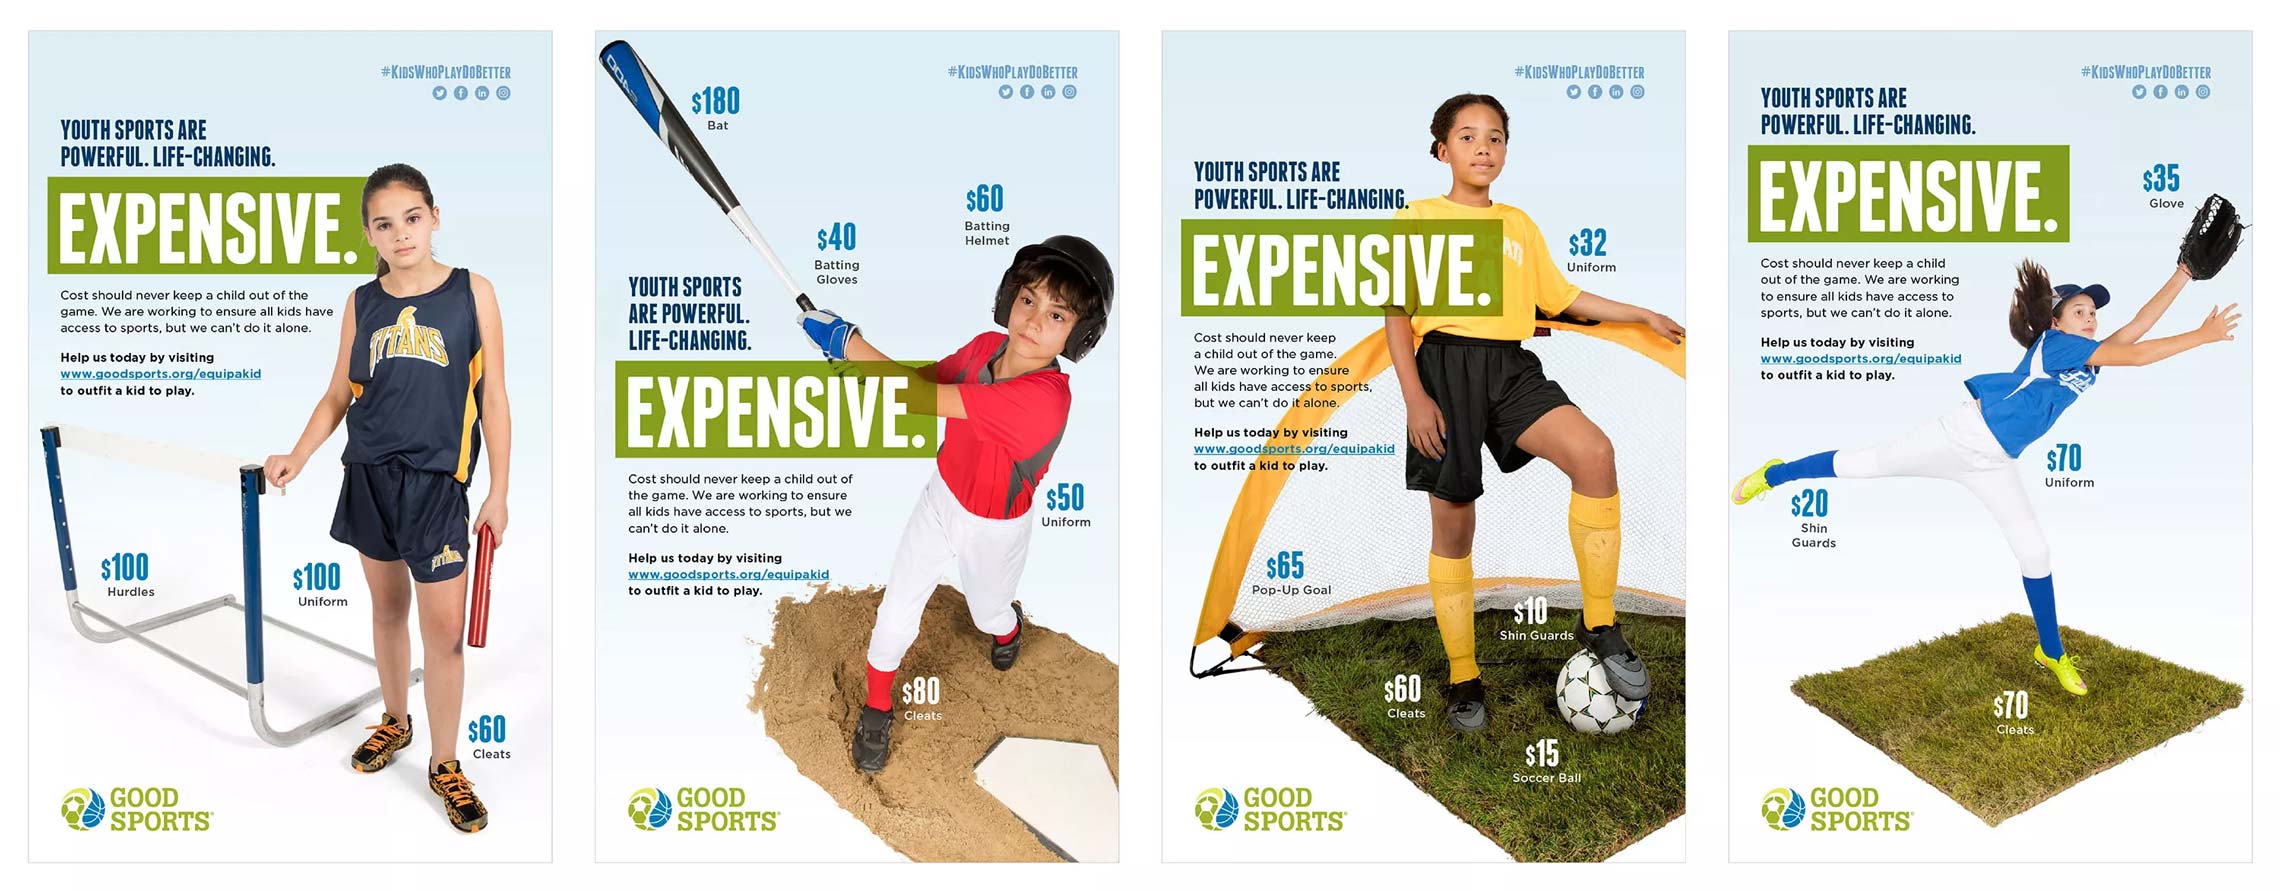 Good Sports advertising campaign communicating the expensive aspect of sports that prevents kids from playing